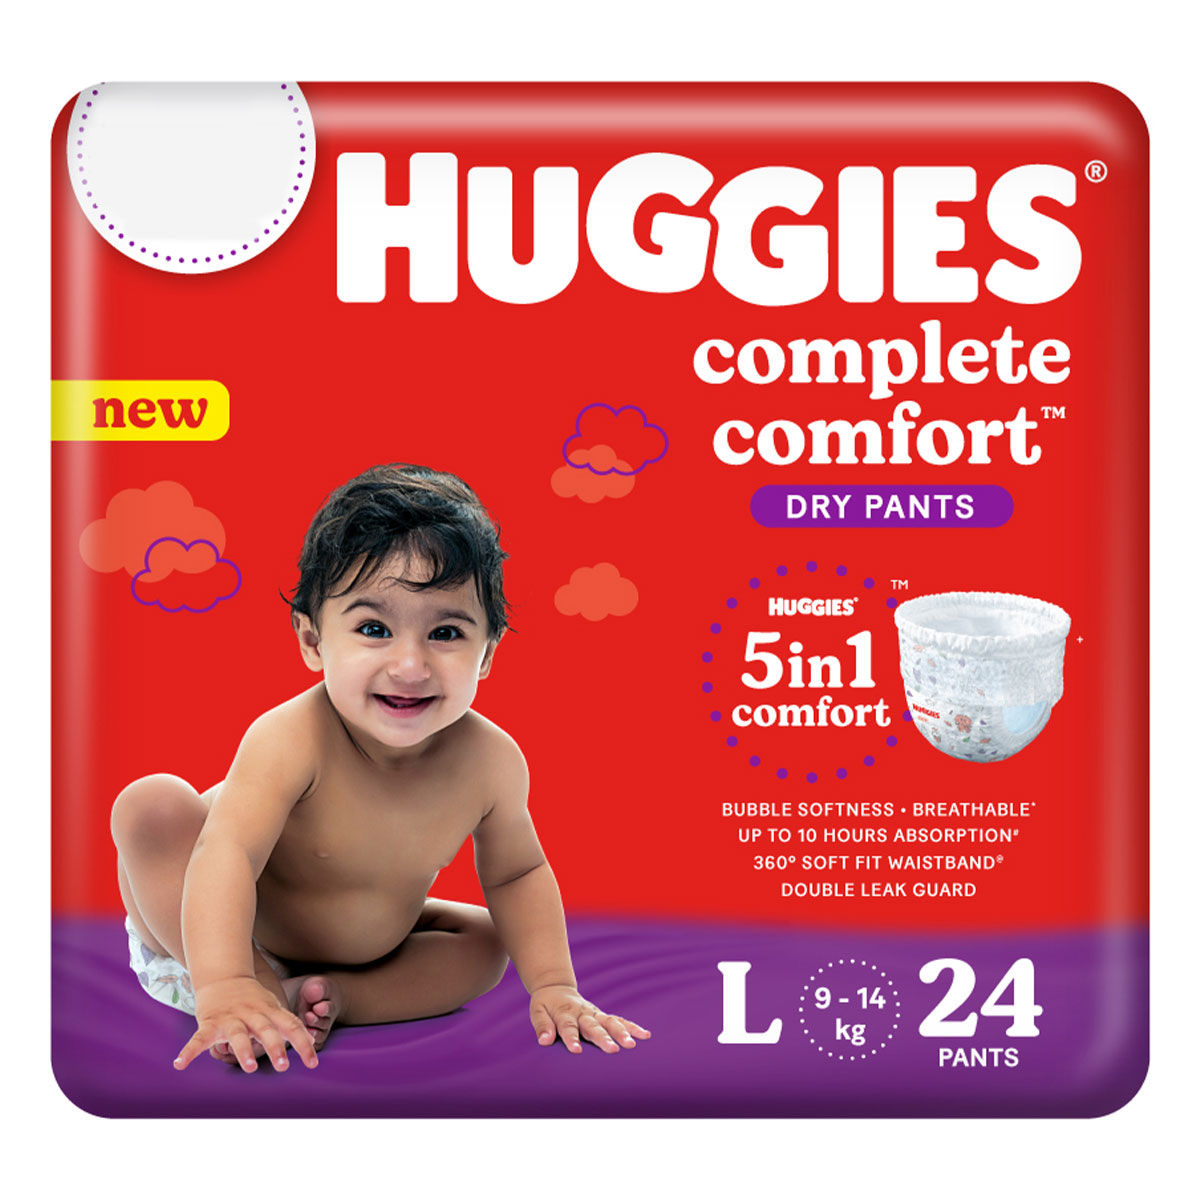 Buy Huggies Wonder Pants, Monthly Box Pack Diapers, Large, 128 Count &  Huggies New Dry, Taped Diapers, Large, 52 Counts Online at Low Prices in  India - Amazon.in